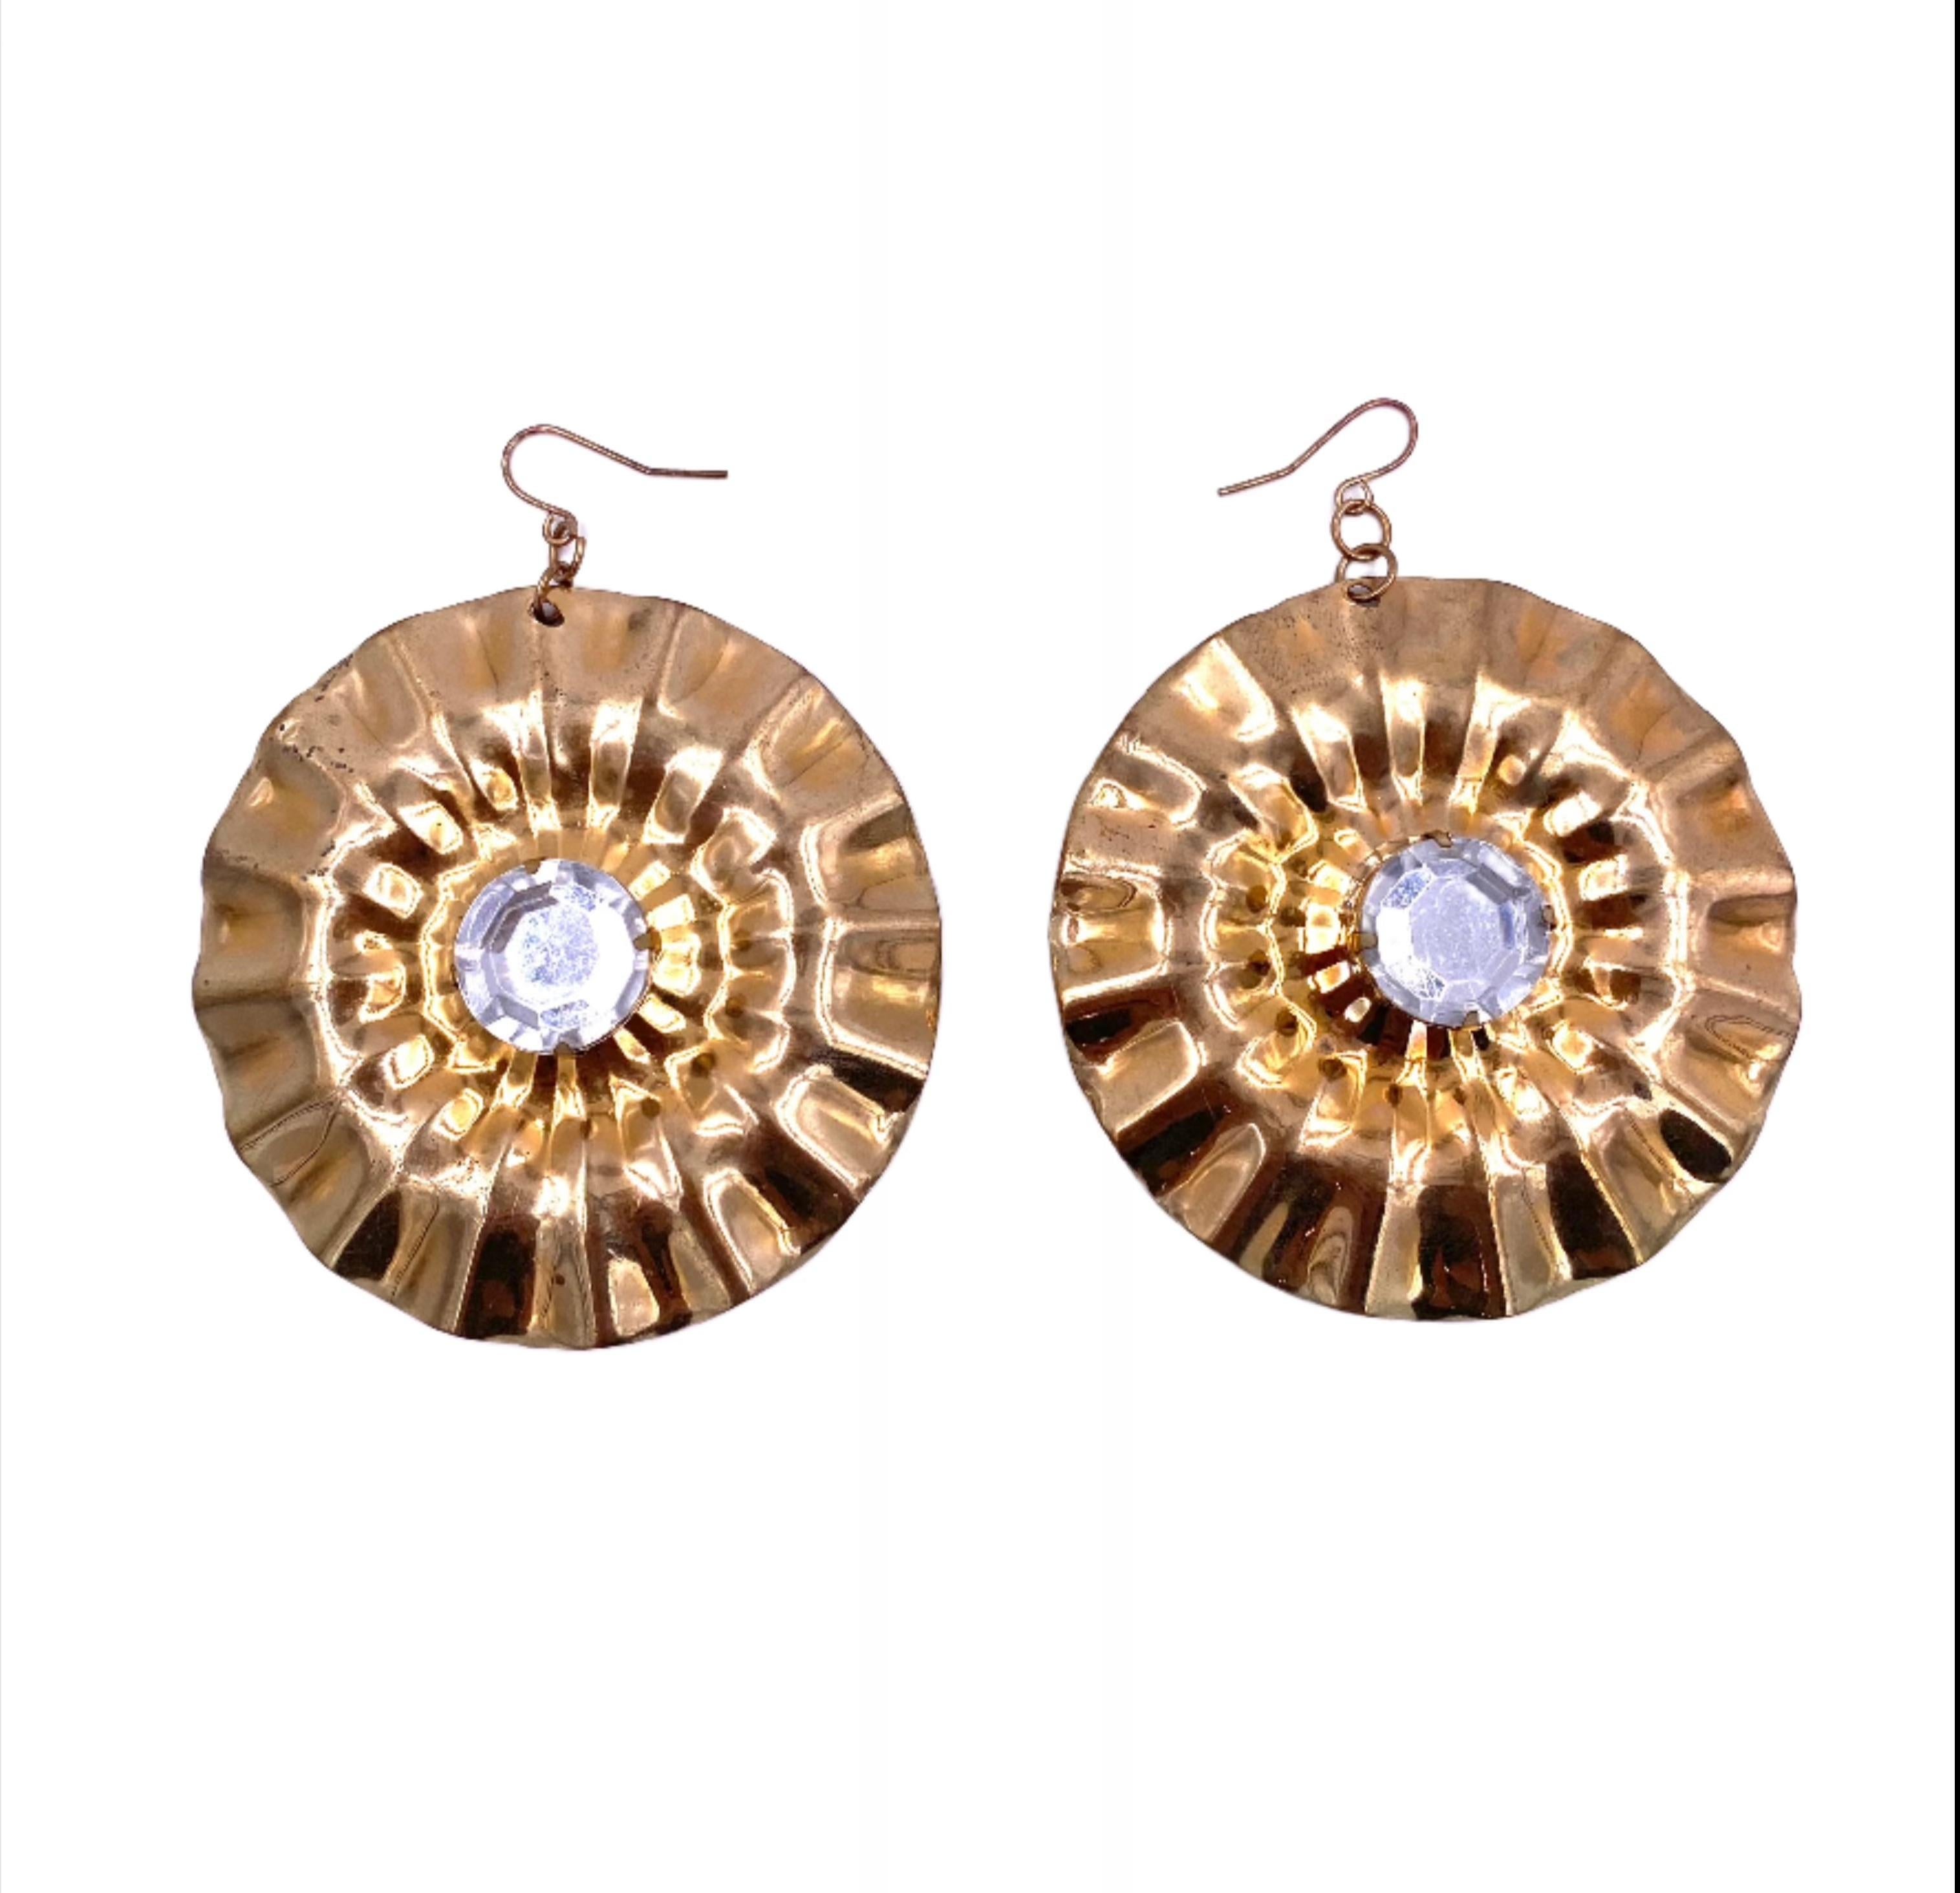 Vintage Large Round Gold Earrings with Large Center Crystal In Good Condition For Sale In Los Angeles, CA